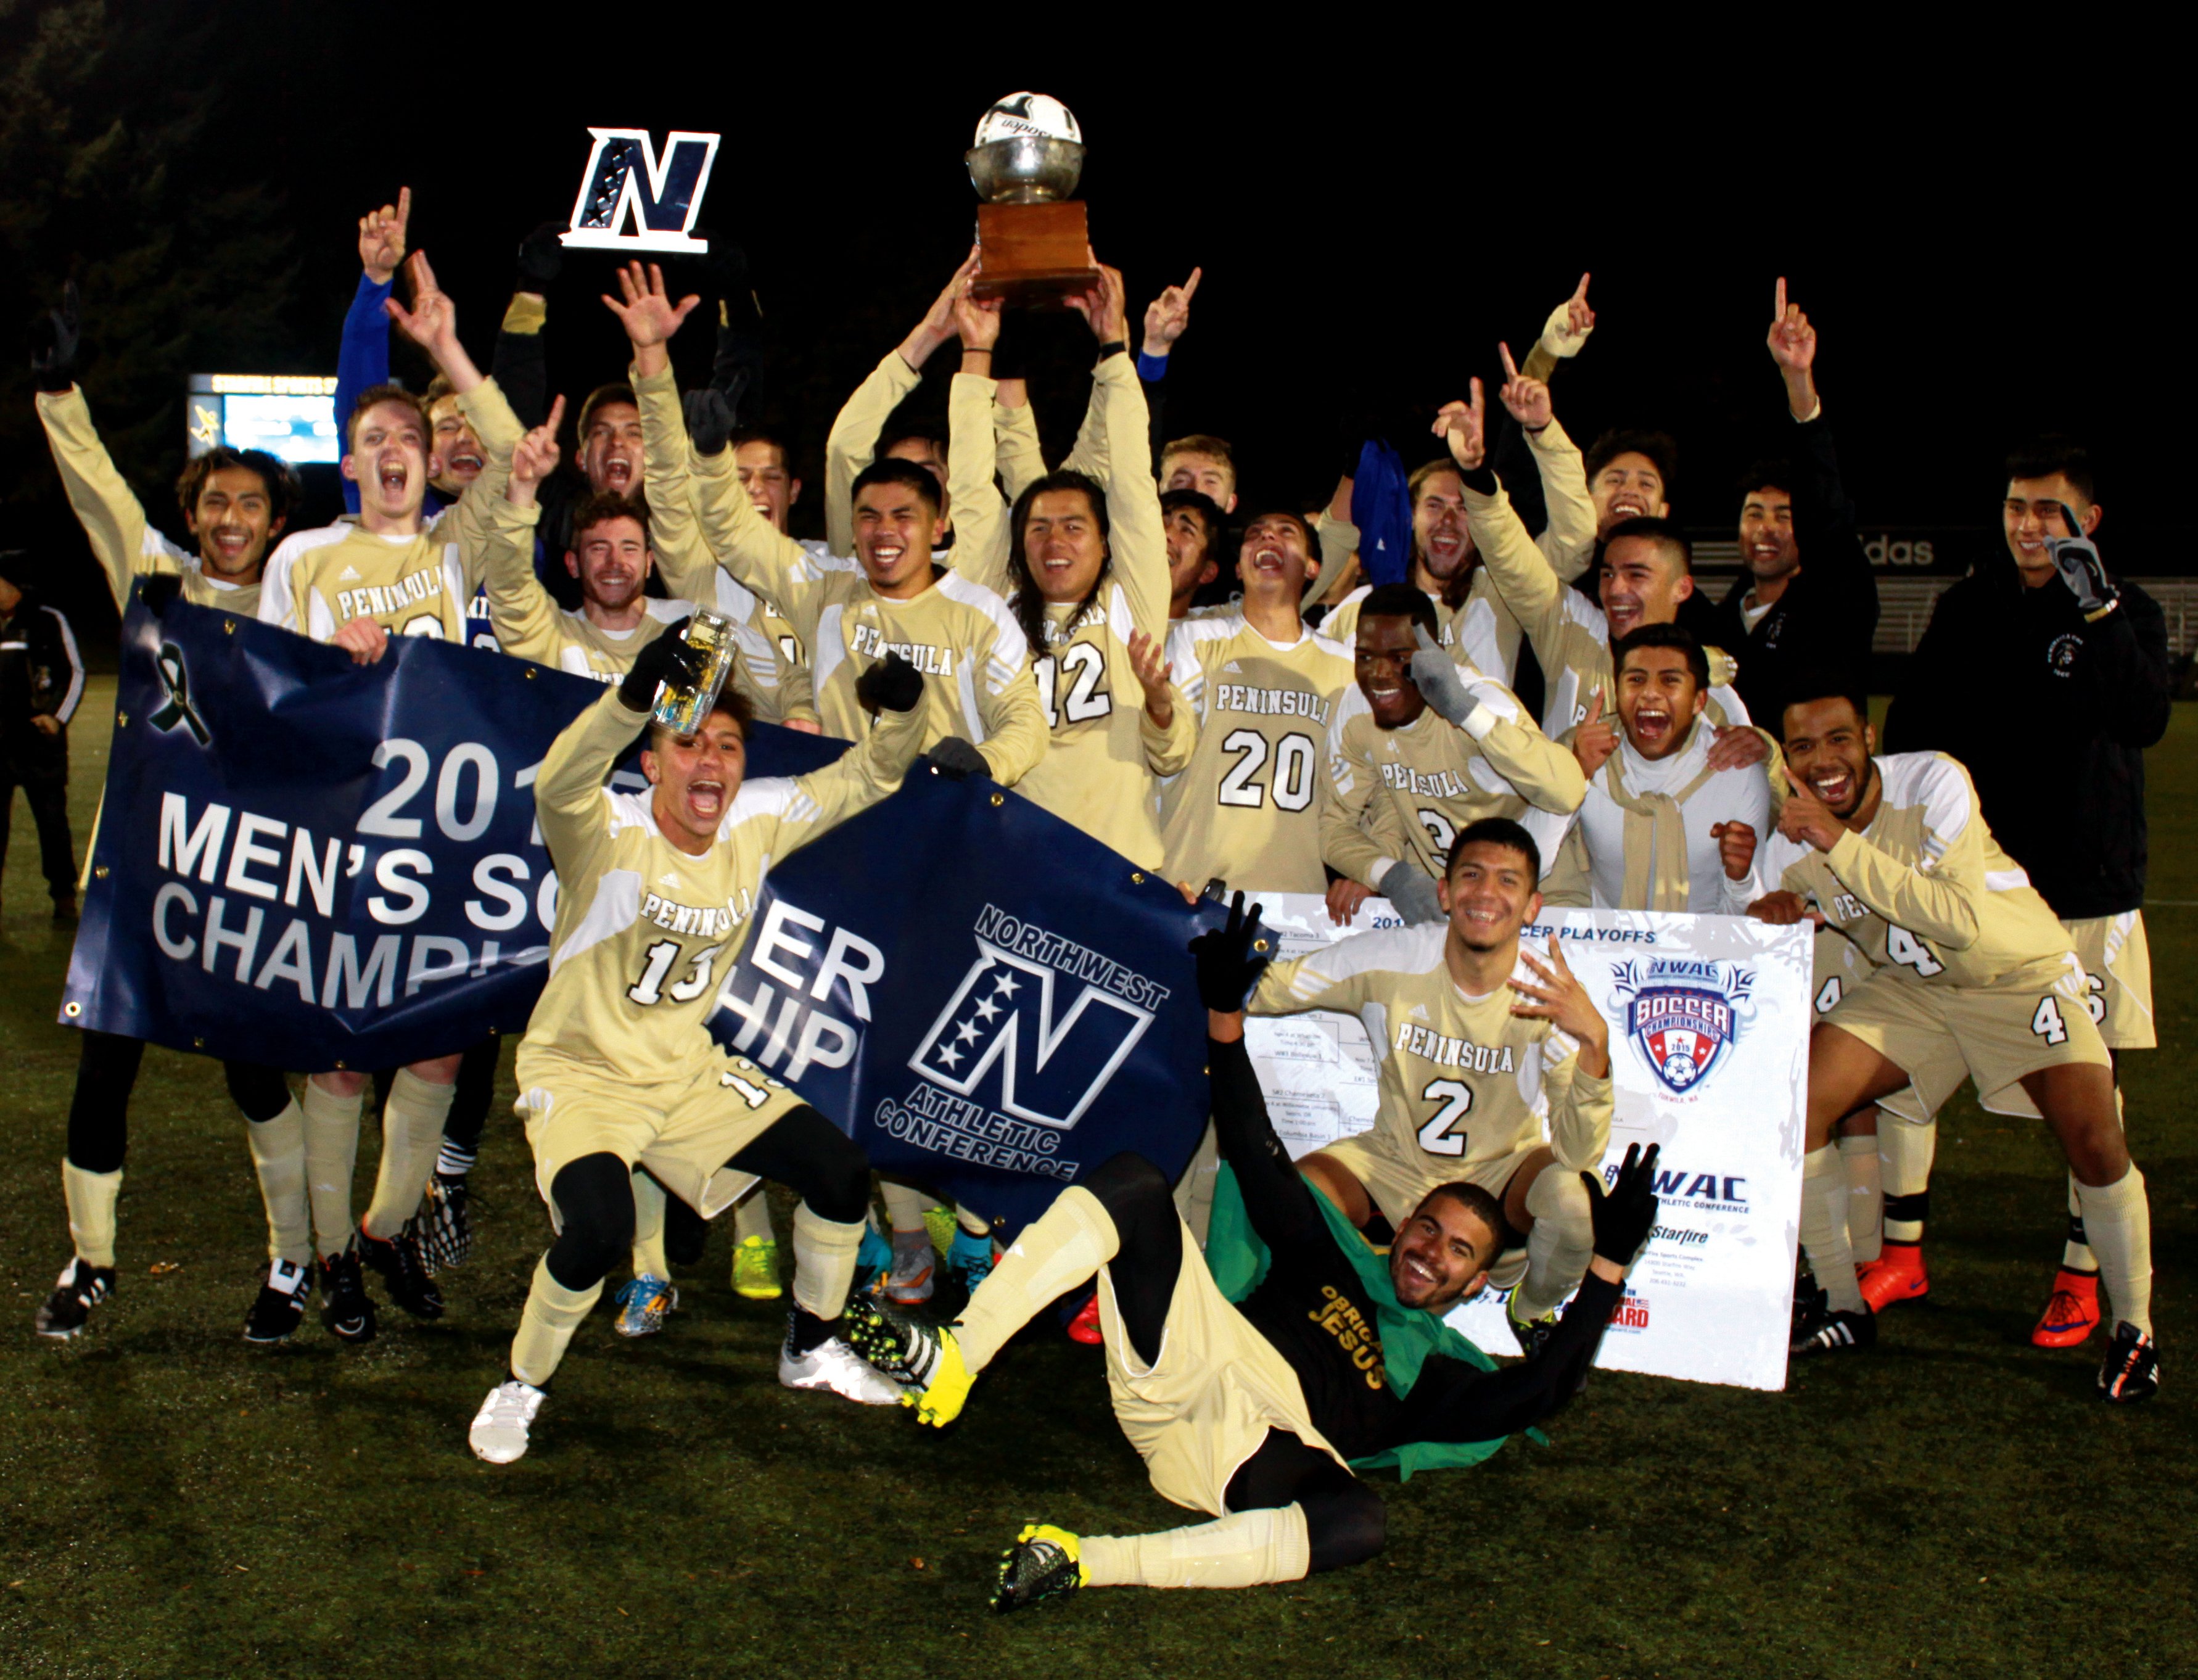 The Peninsula College men's soccer team celebrates after winning the NWAC championship with a 4-3 win over Spokane at Starfire Sports Complex in Tukwila. Jose Soto (2) scored the winning goal in the 85th minute. Rick Harrison/for NWAC